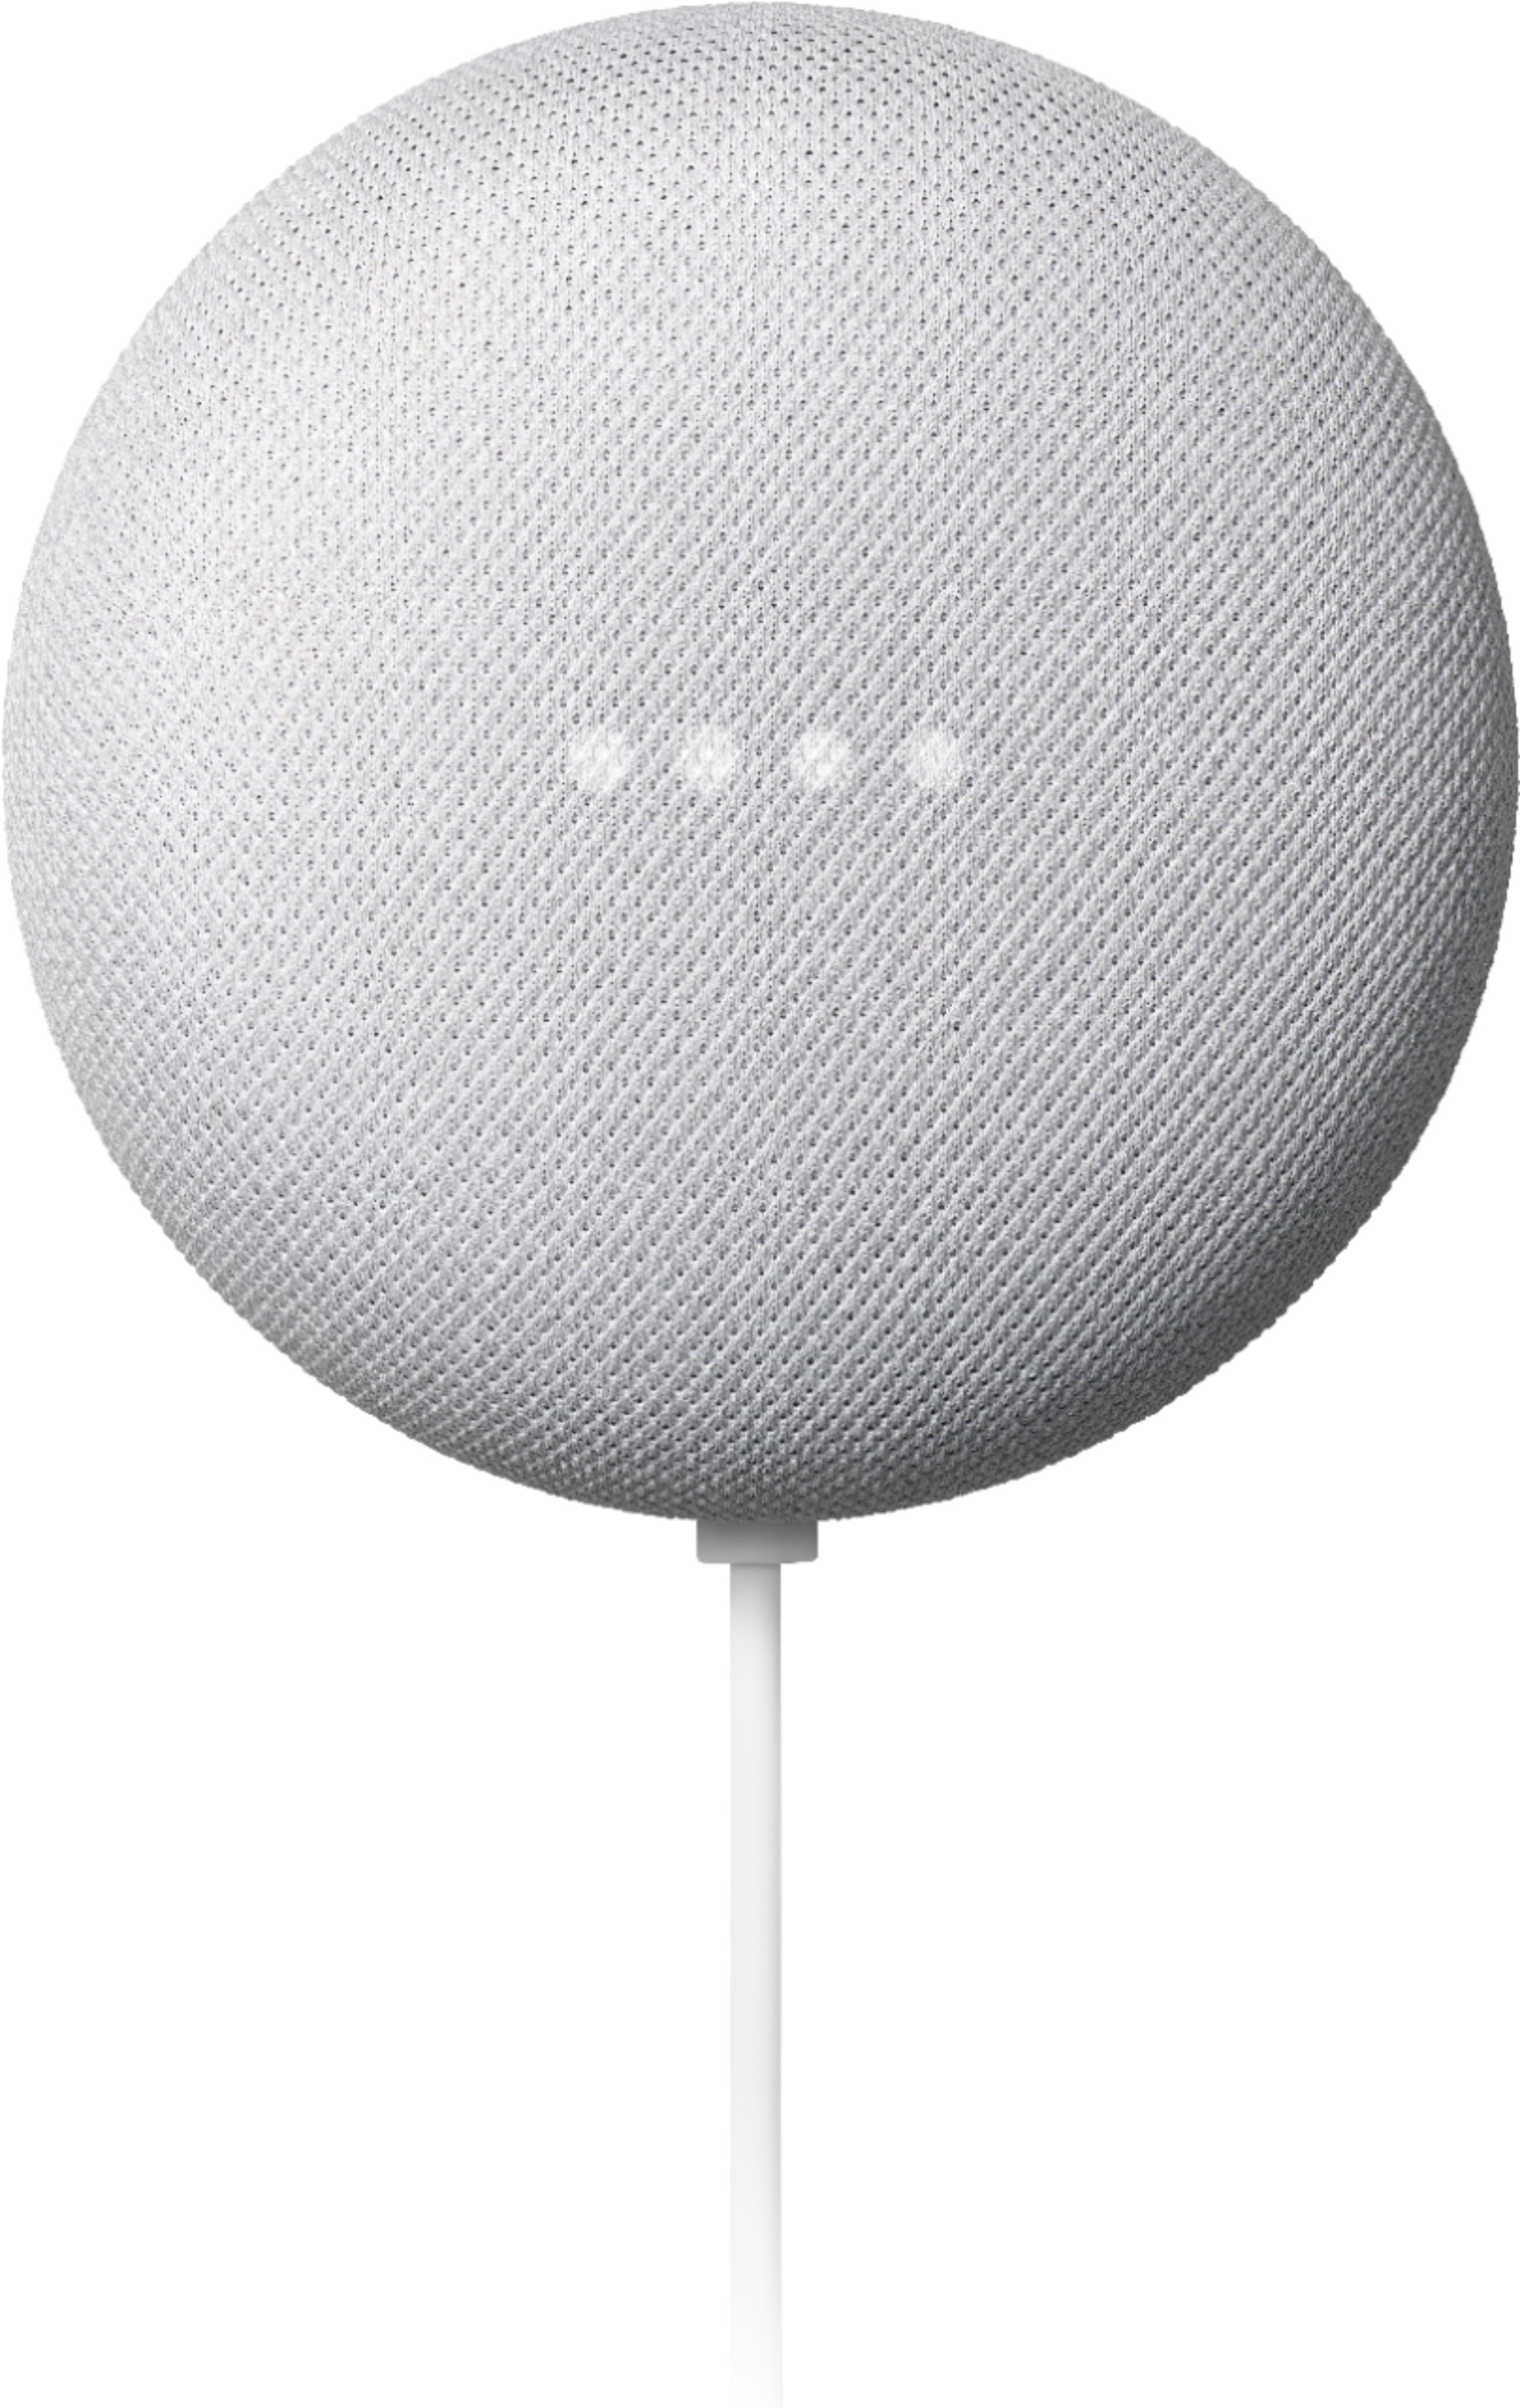 Nest Mini (2nd Generation) with Google Assistant Chalk GA00638-US Best Buy